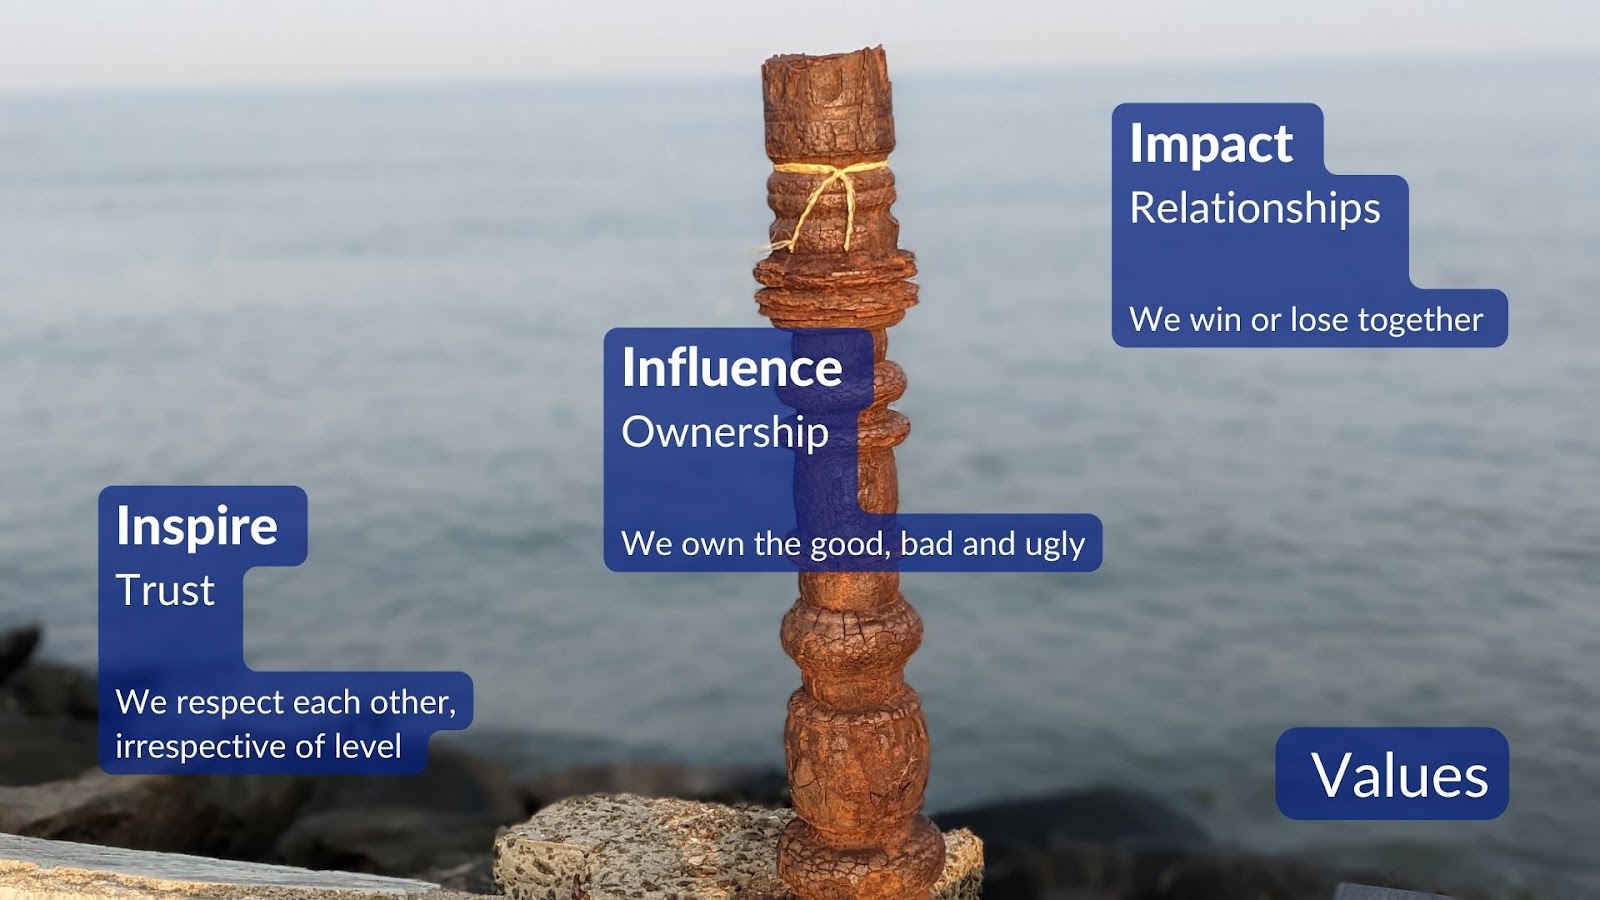 An image of the sea with three values written in text over the top. It reads: Inspire - trust, we respect each other, irrespective of level. Influence - ownership, we own the good, bad, and ugly. Impact - relationships, we win or lose together.